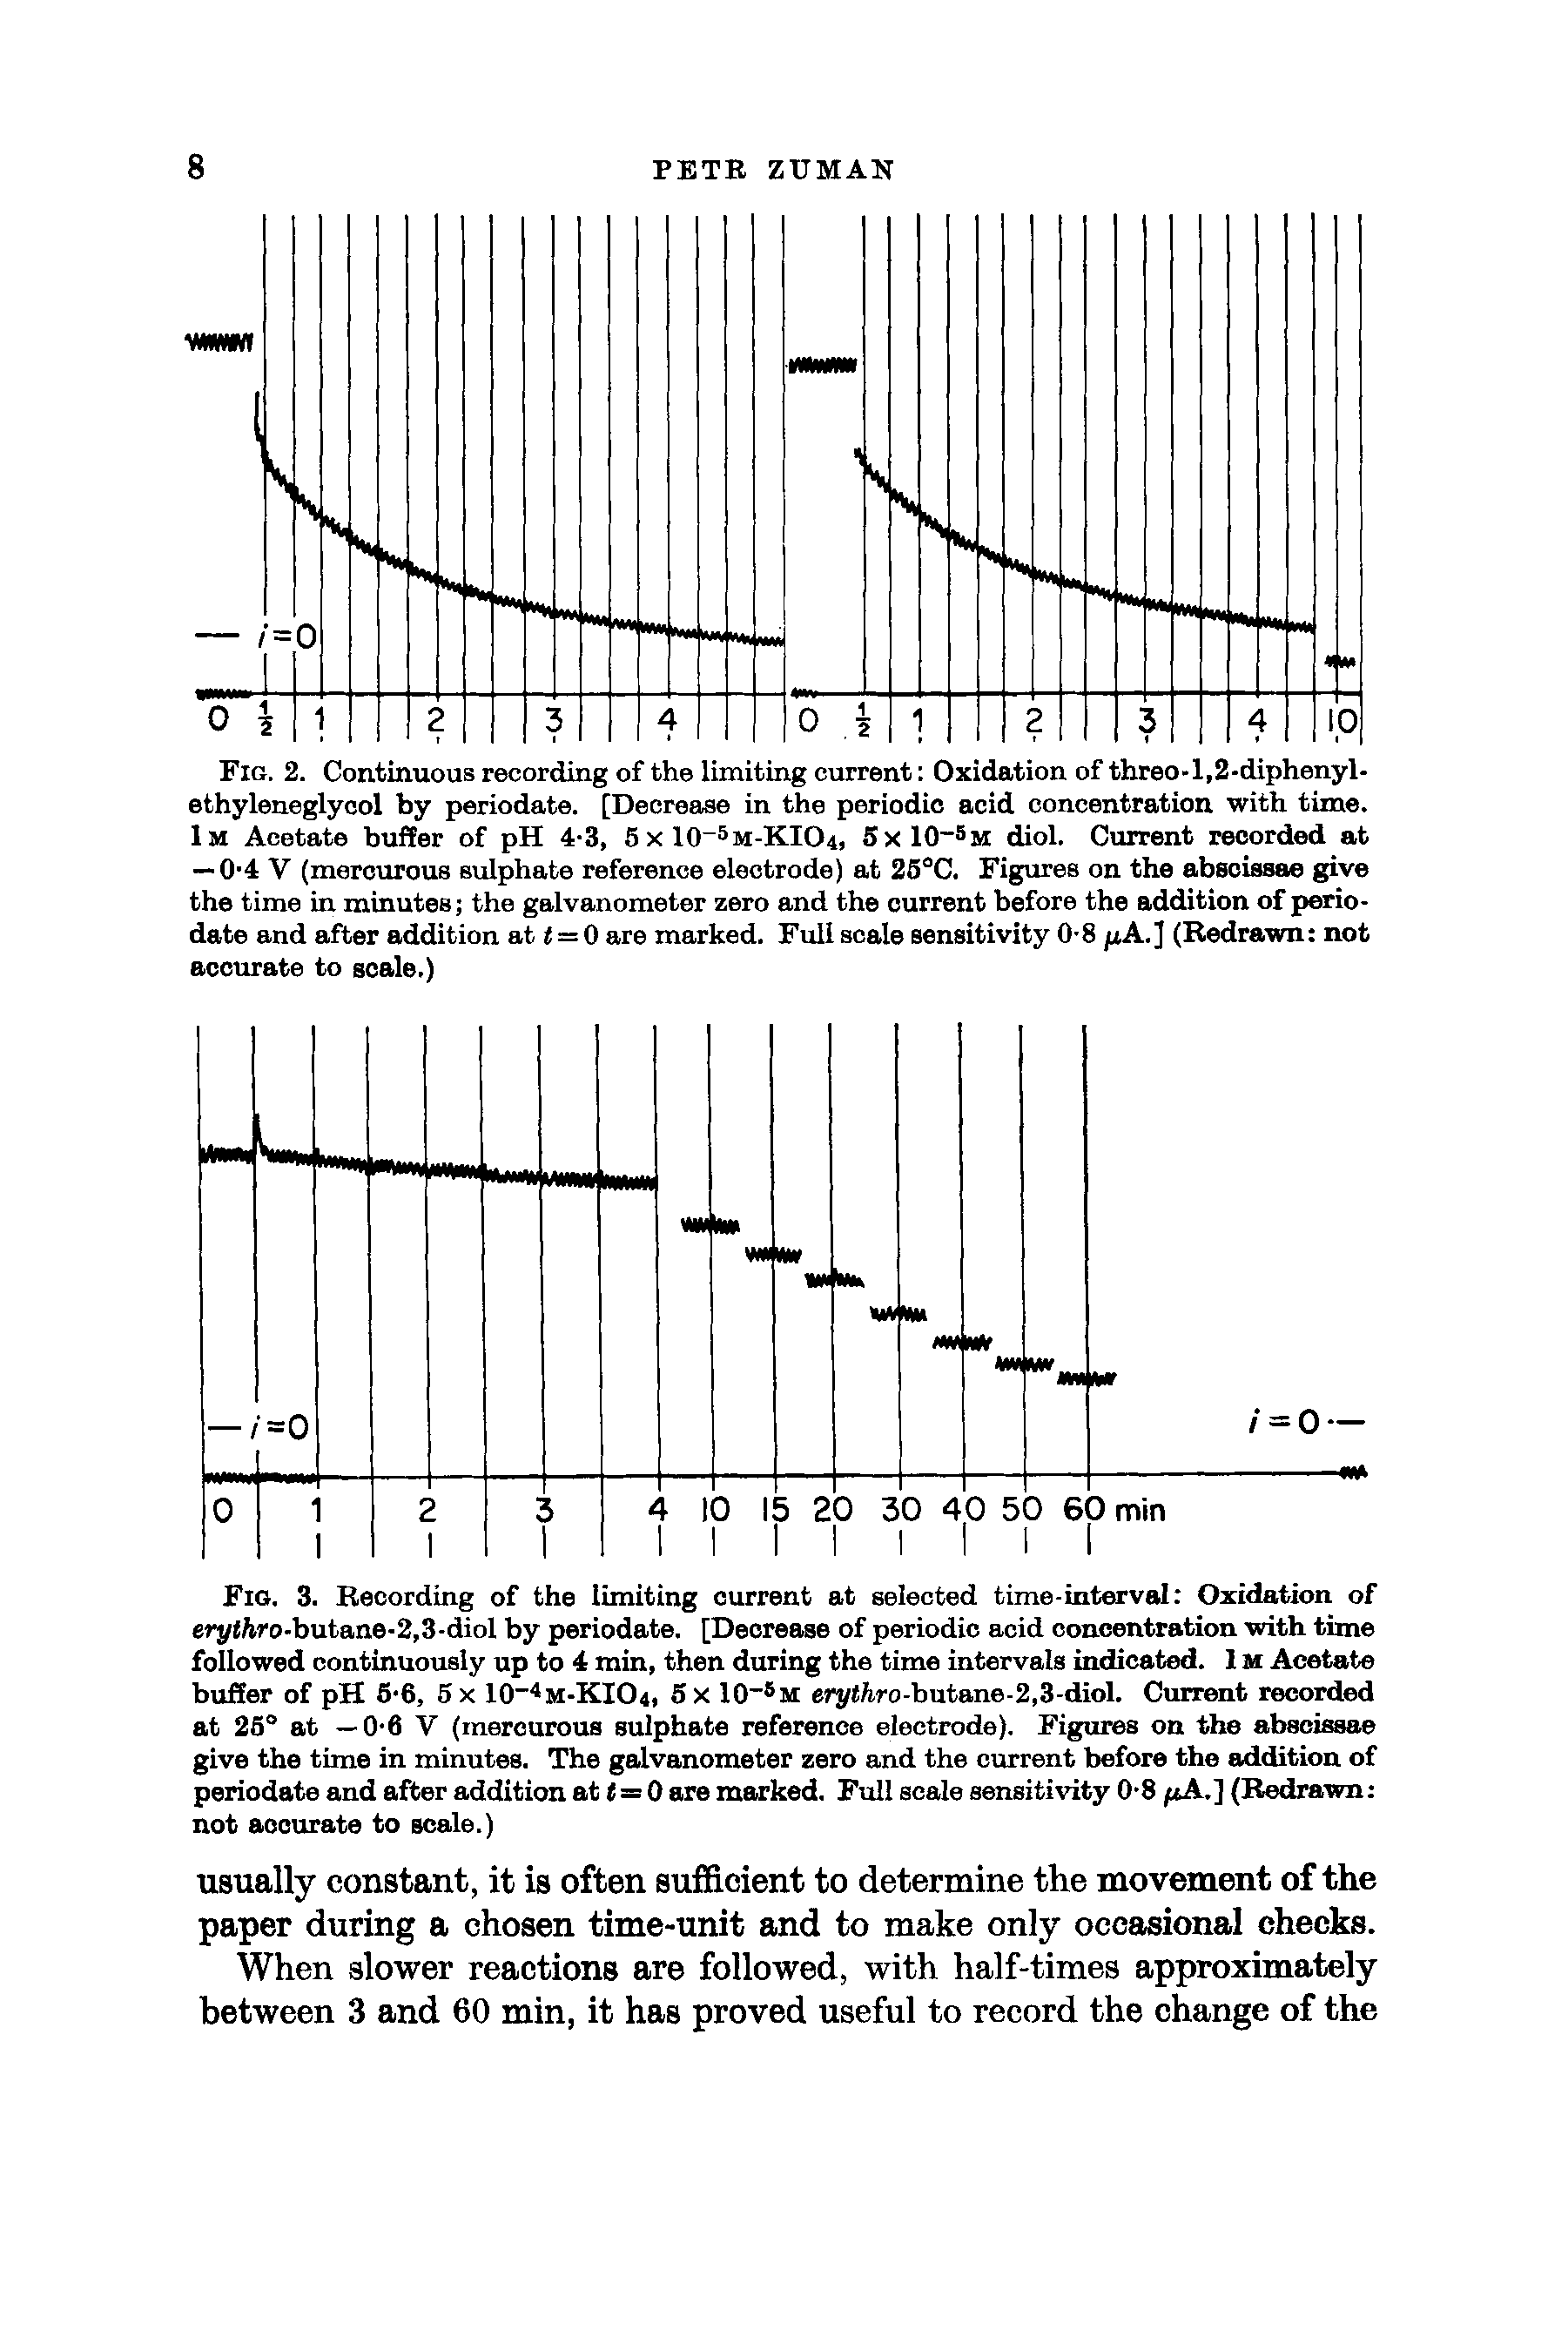 Fig. 3. Recording of the limiting current at selected time-interval Oxidation of erj/iftro-butane-2,3-diol by periodate. [Decrease of periodic acid concentration with time followed continuously up to 4 min, then during the time intervals indicated. IM Acetate buffer of pH 5-6, 5 x 10 4m-KIO4, 5 X 10 m 6ry ftro-butane-2,3-diol. Current recorded at 25° at — 0-6 V (mercurous sulphate reference electrode). Figures on the abscissae give the time in minutes. The galvanometer zero and the current before the addition of periodate and after addition at t = 0 are marked. Full scale sensitivity 0-8 fiA.J (Redrawn not accurate to scale.)...